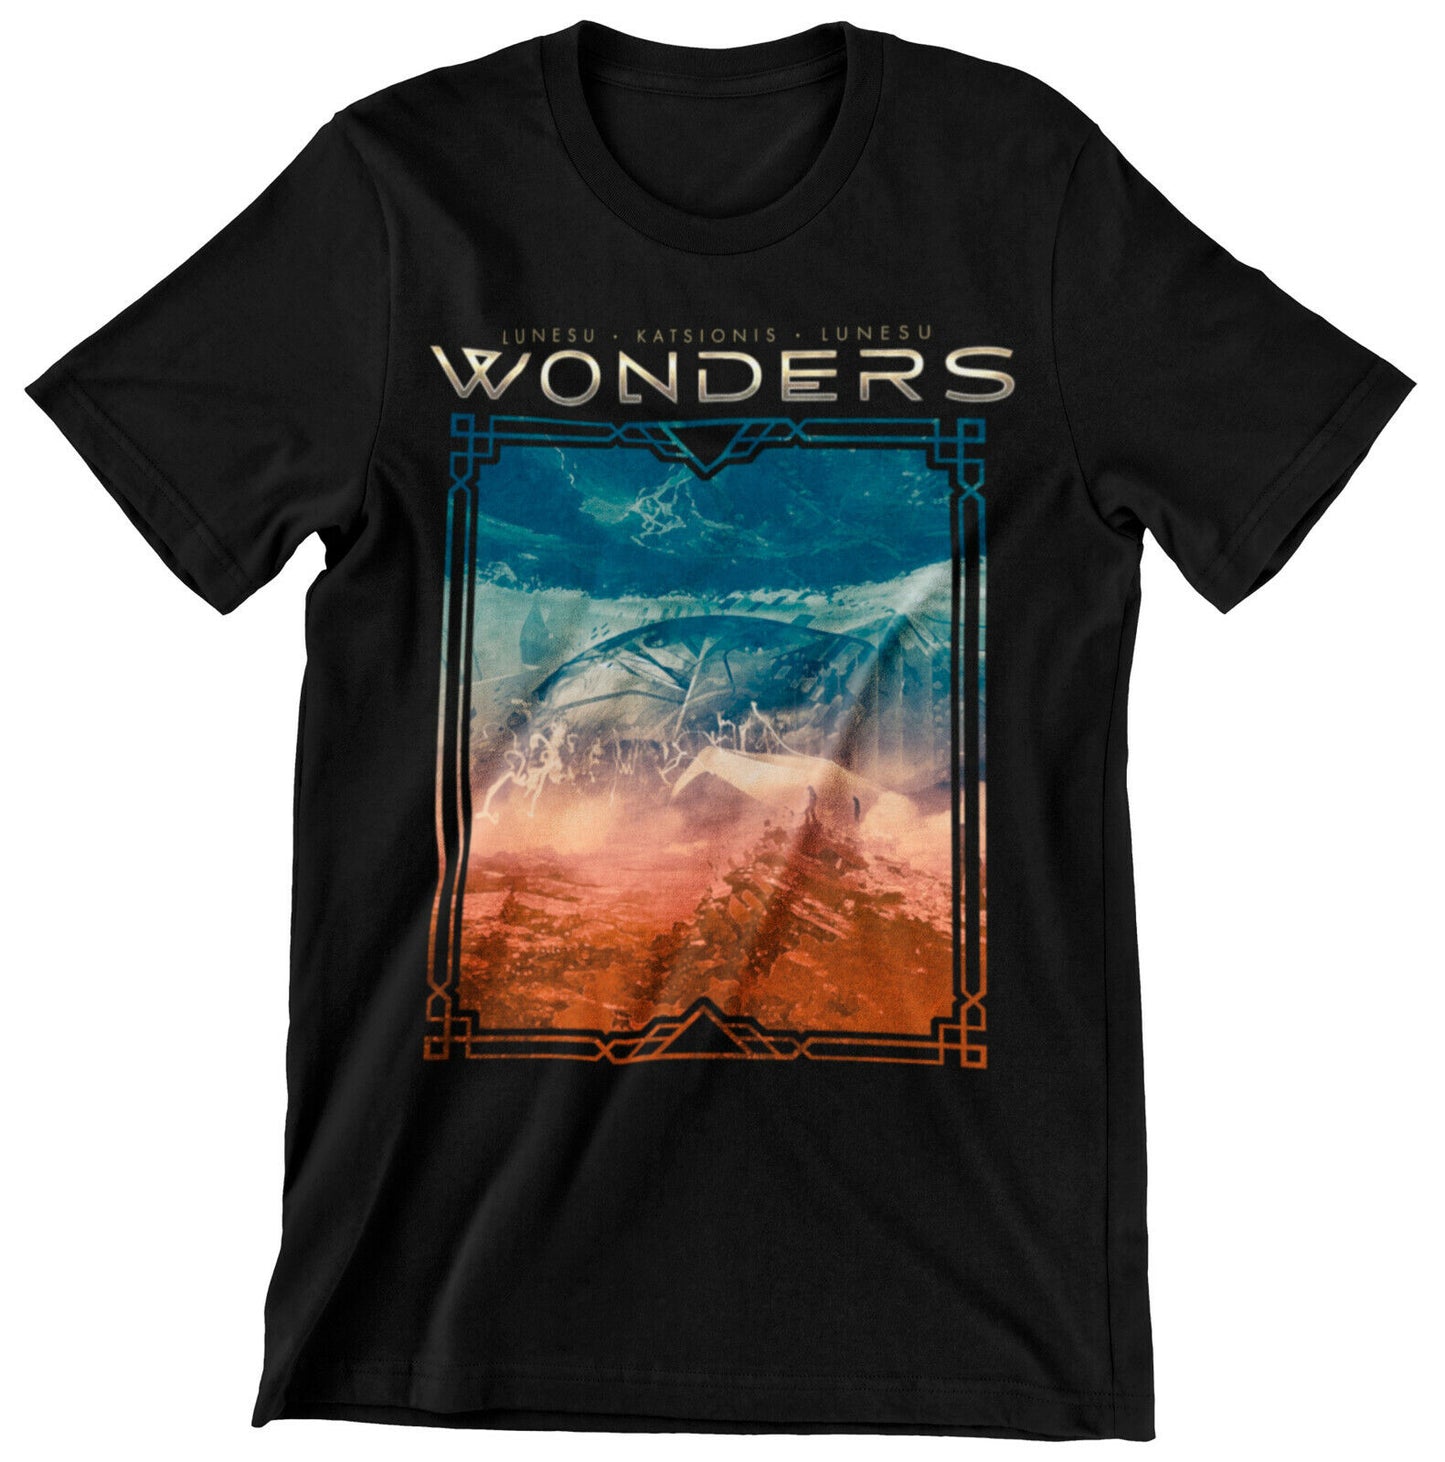 WONDERS - The Fragments Of Wonder T-Shirt size M Melodic Metal